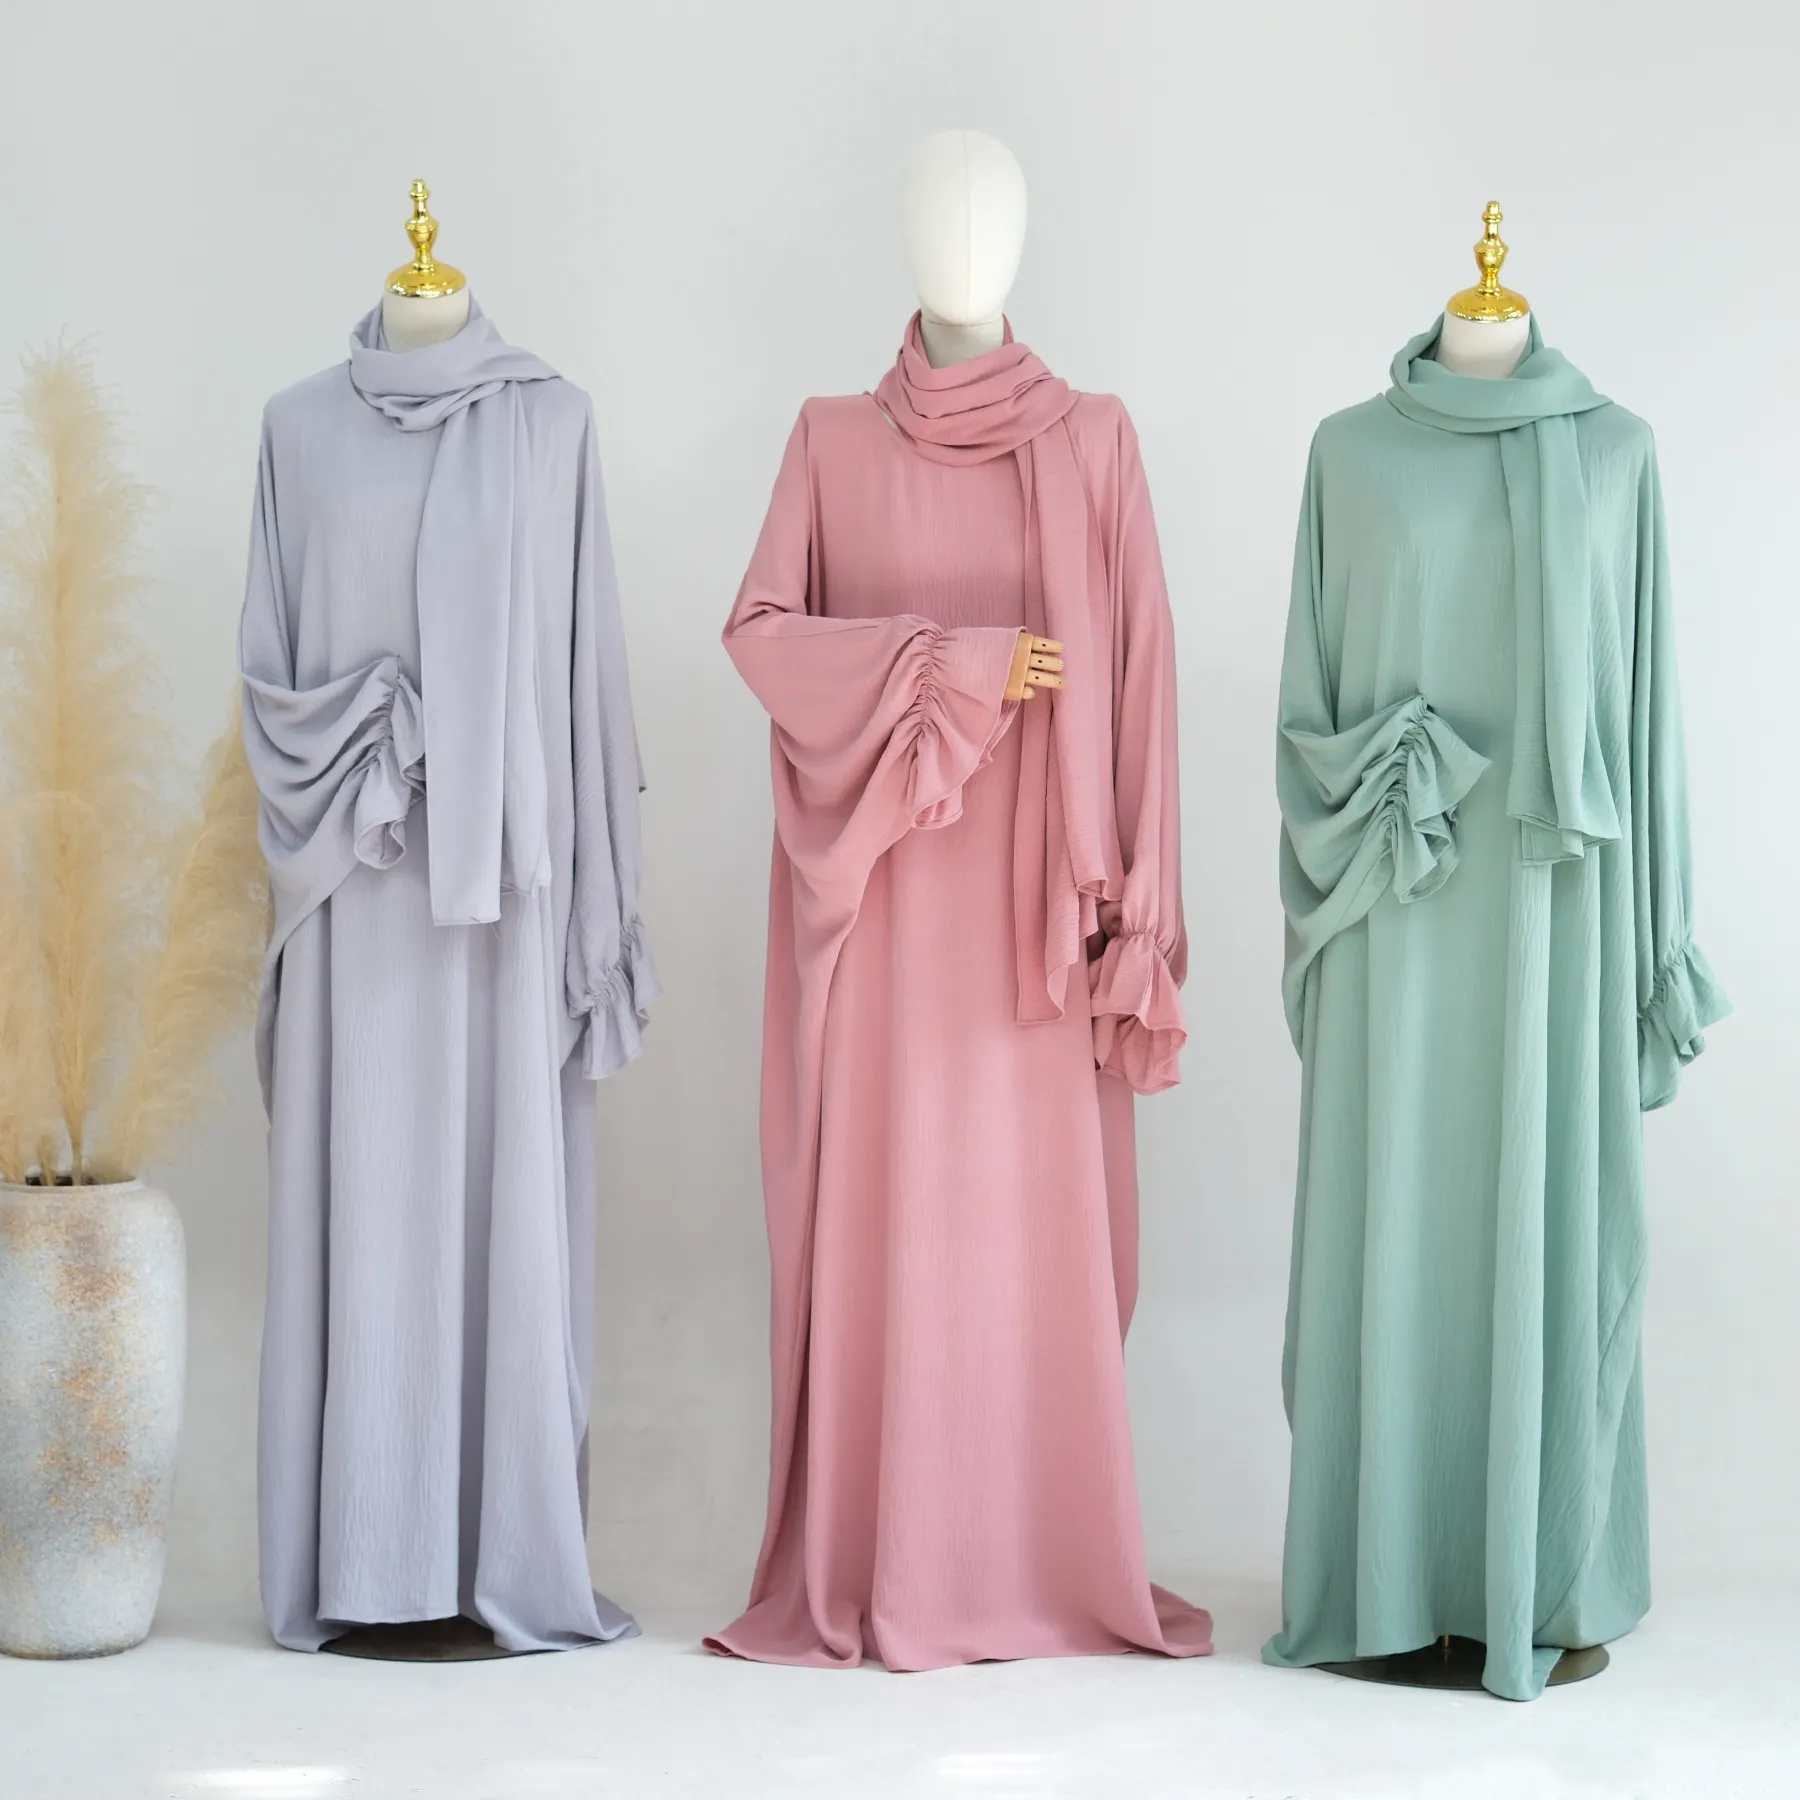 Plain Color Modern Muslim Different Style Hijabs And Abaya Set Polyester Cotton Blend Soft Les Robes Abaya